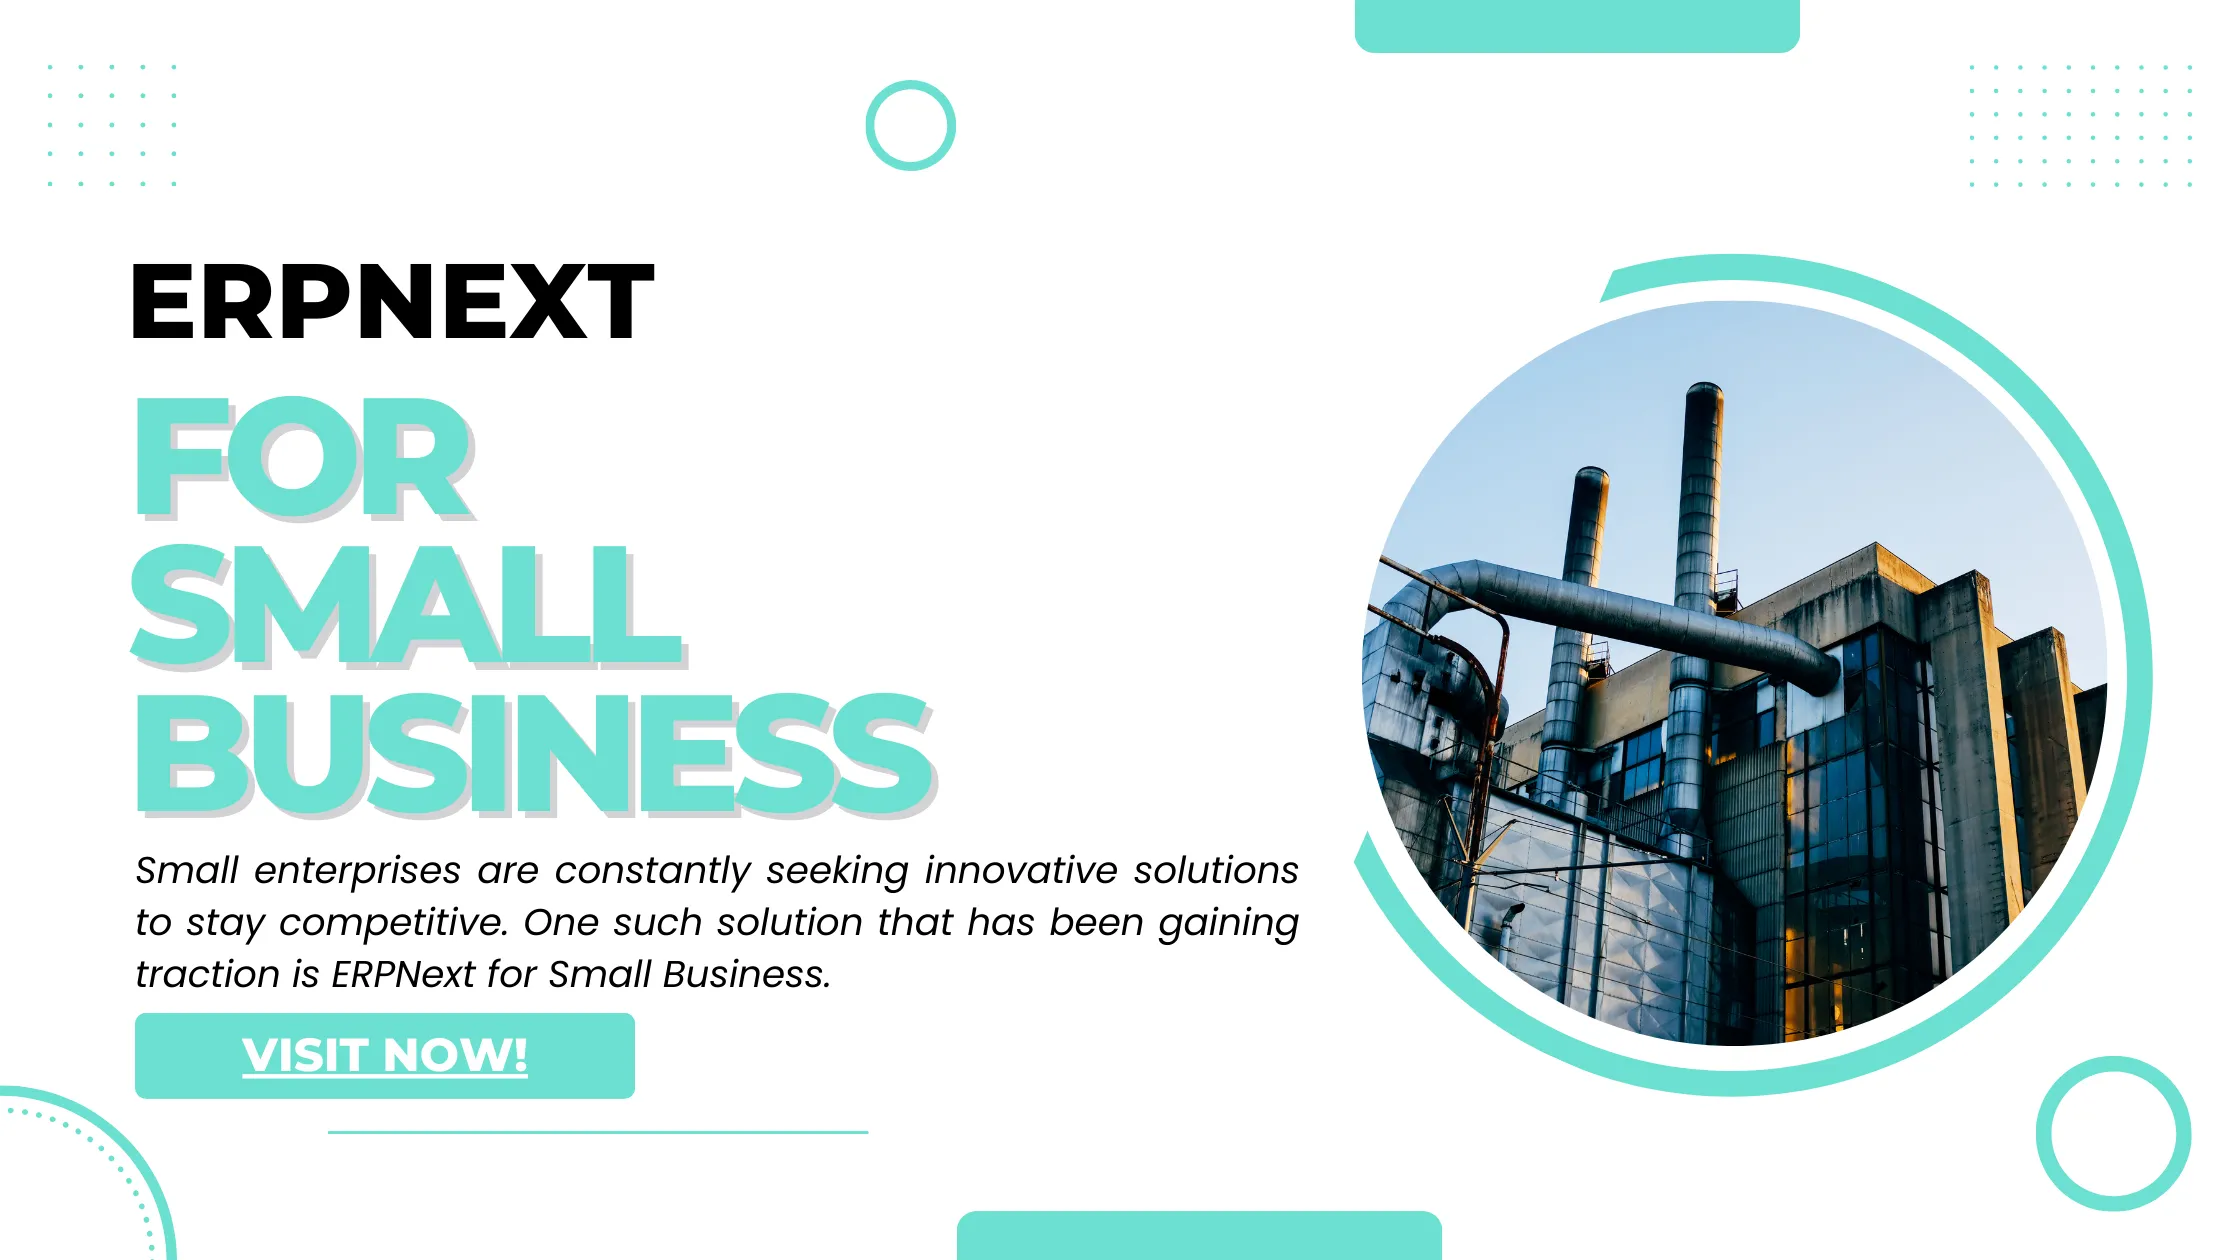 ERPNext for Small Business